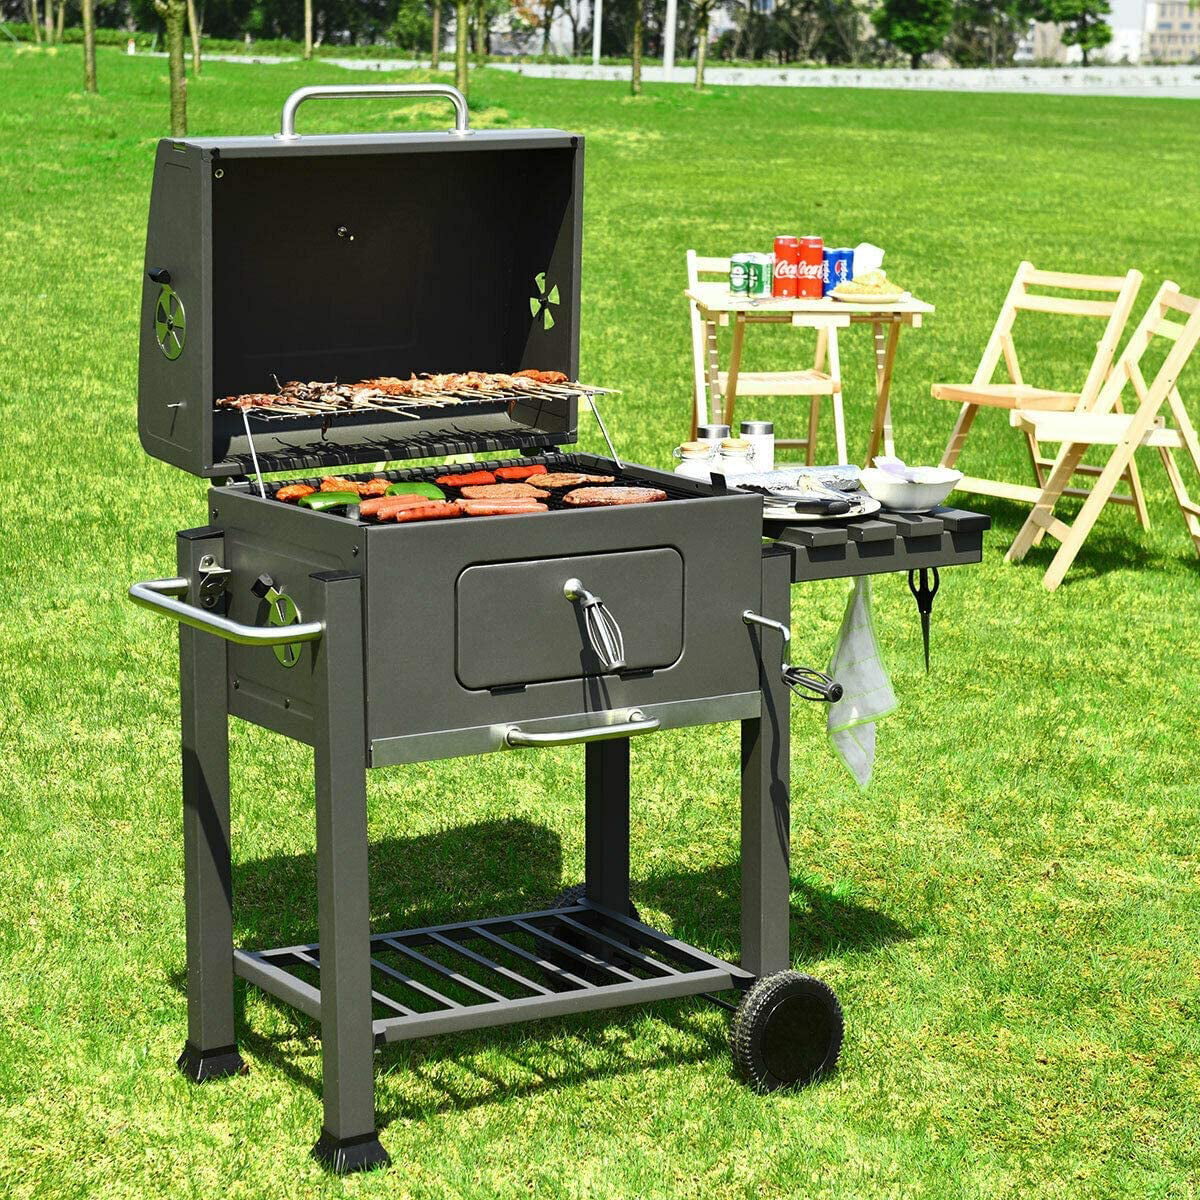 BBQ Barbecue Charcoal Grill w/ Wheels Portable Picnic Party Outdoor Patio Garden 